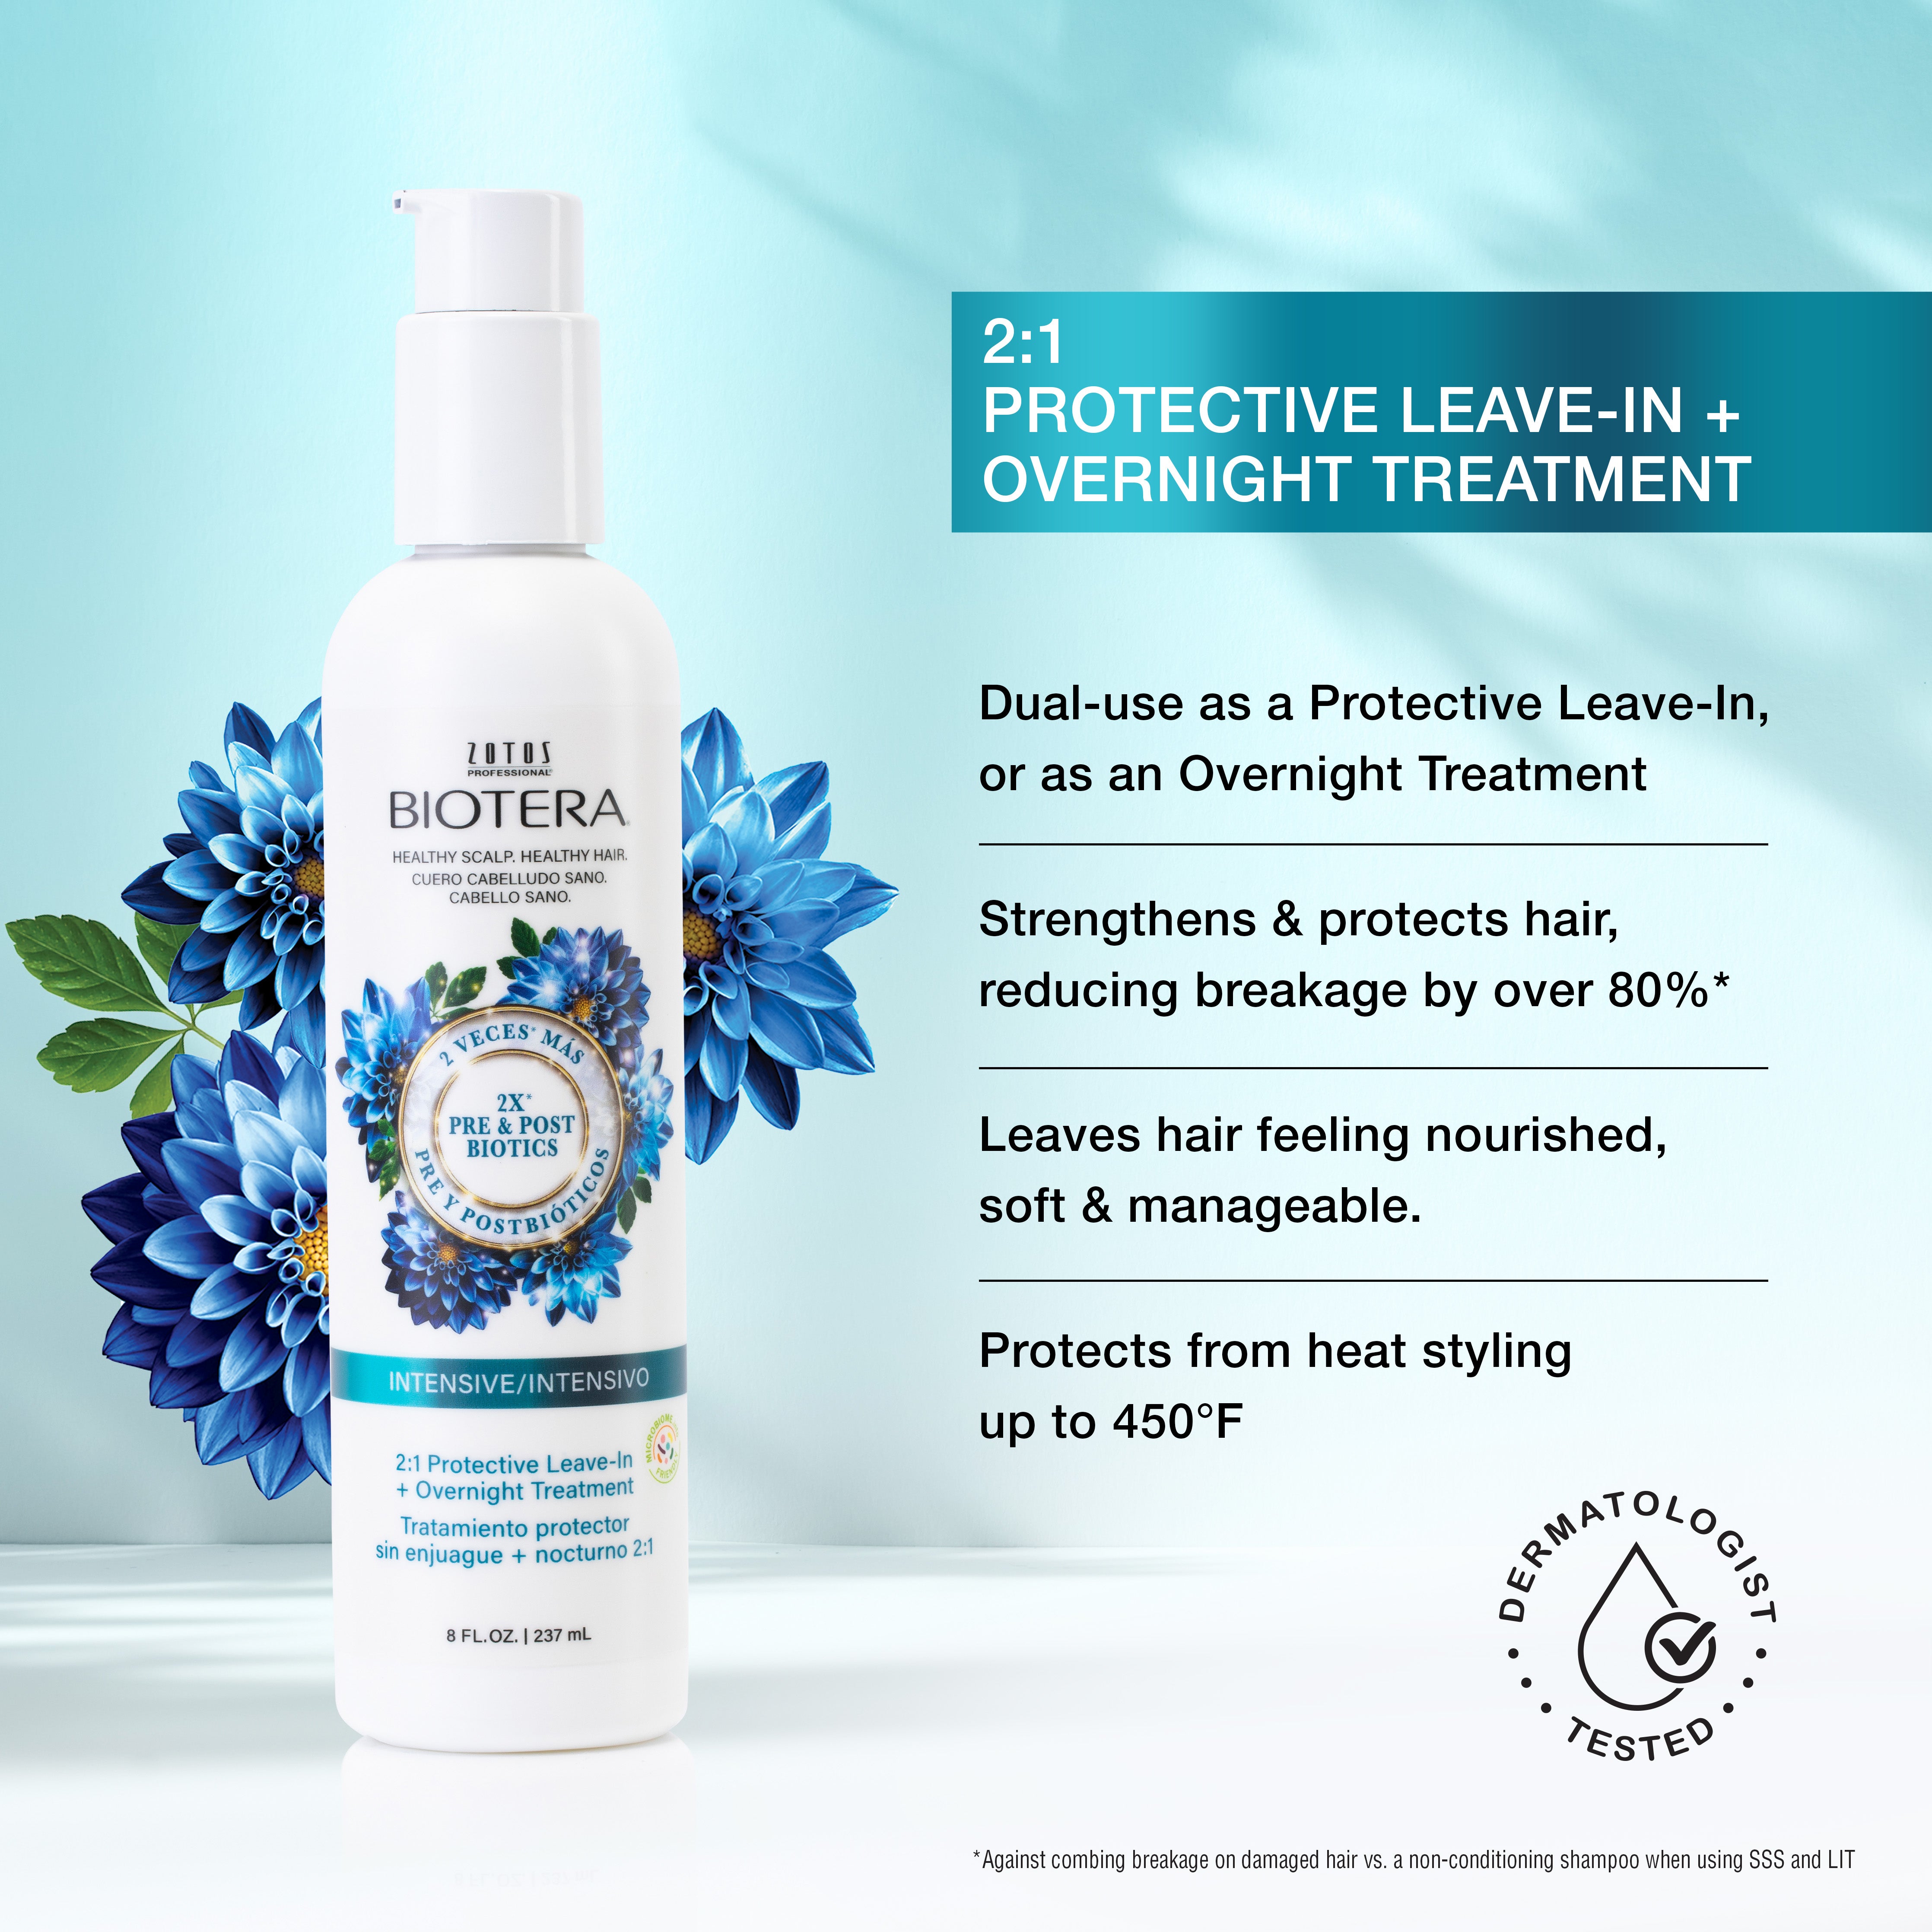 Dual-use as a protective leave-in or as an overnight treatment, strengthens and protects hair, reducing breakage by over 80% (against combing breakage on damage hair vs. a non-conditioning shampoo when using SSS and LIT). Leaves hair feeling nourished, soft and manageable. Protects from heat styling up to 45 degrees Fahrenheit. Dermatologist tested.  